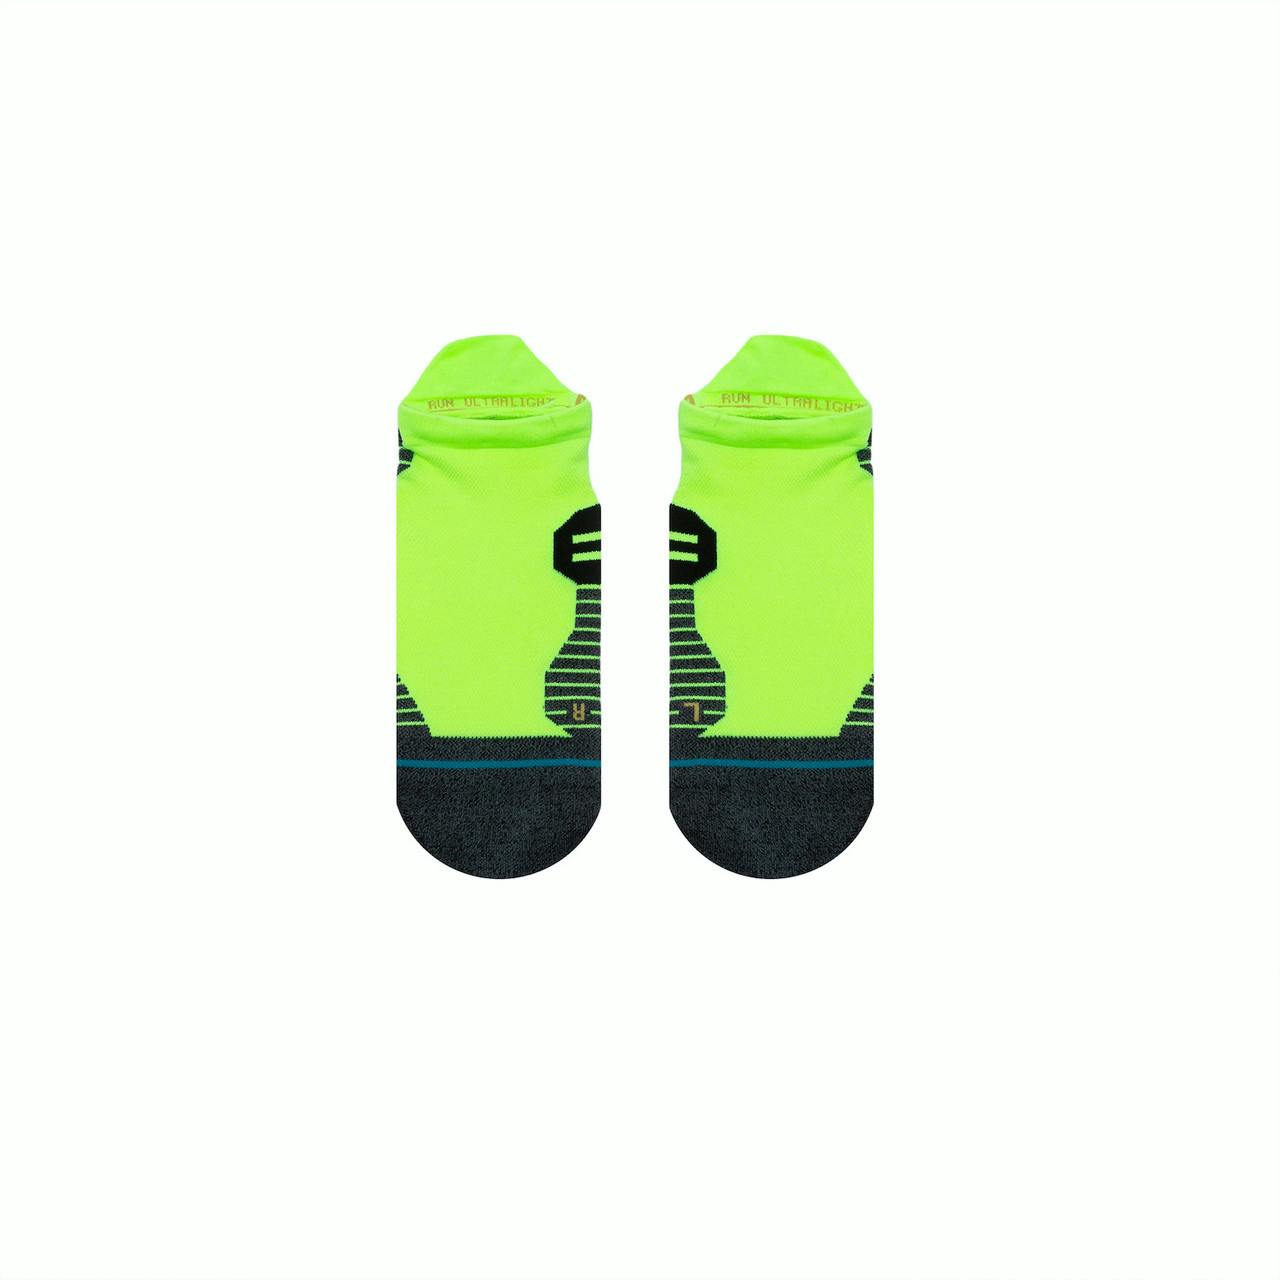 Chaussettes invisibles Ultra Corail vert